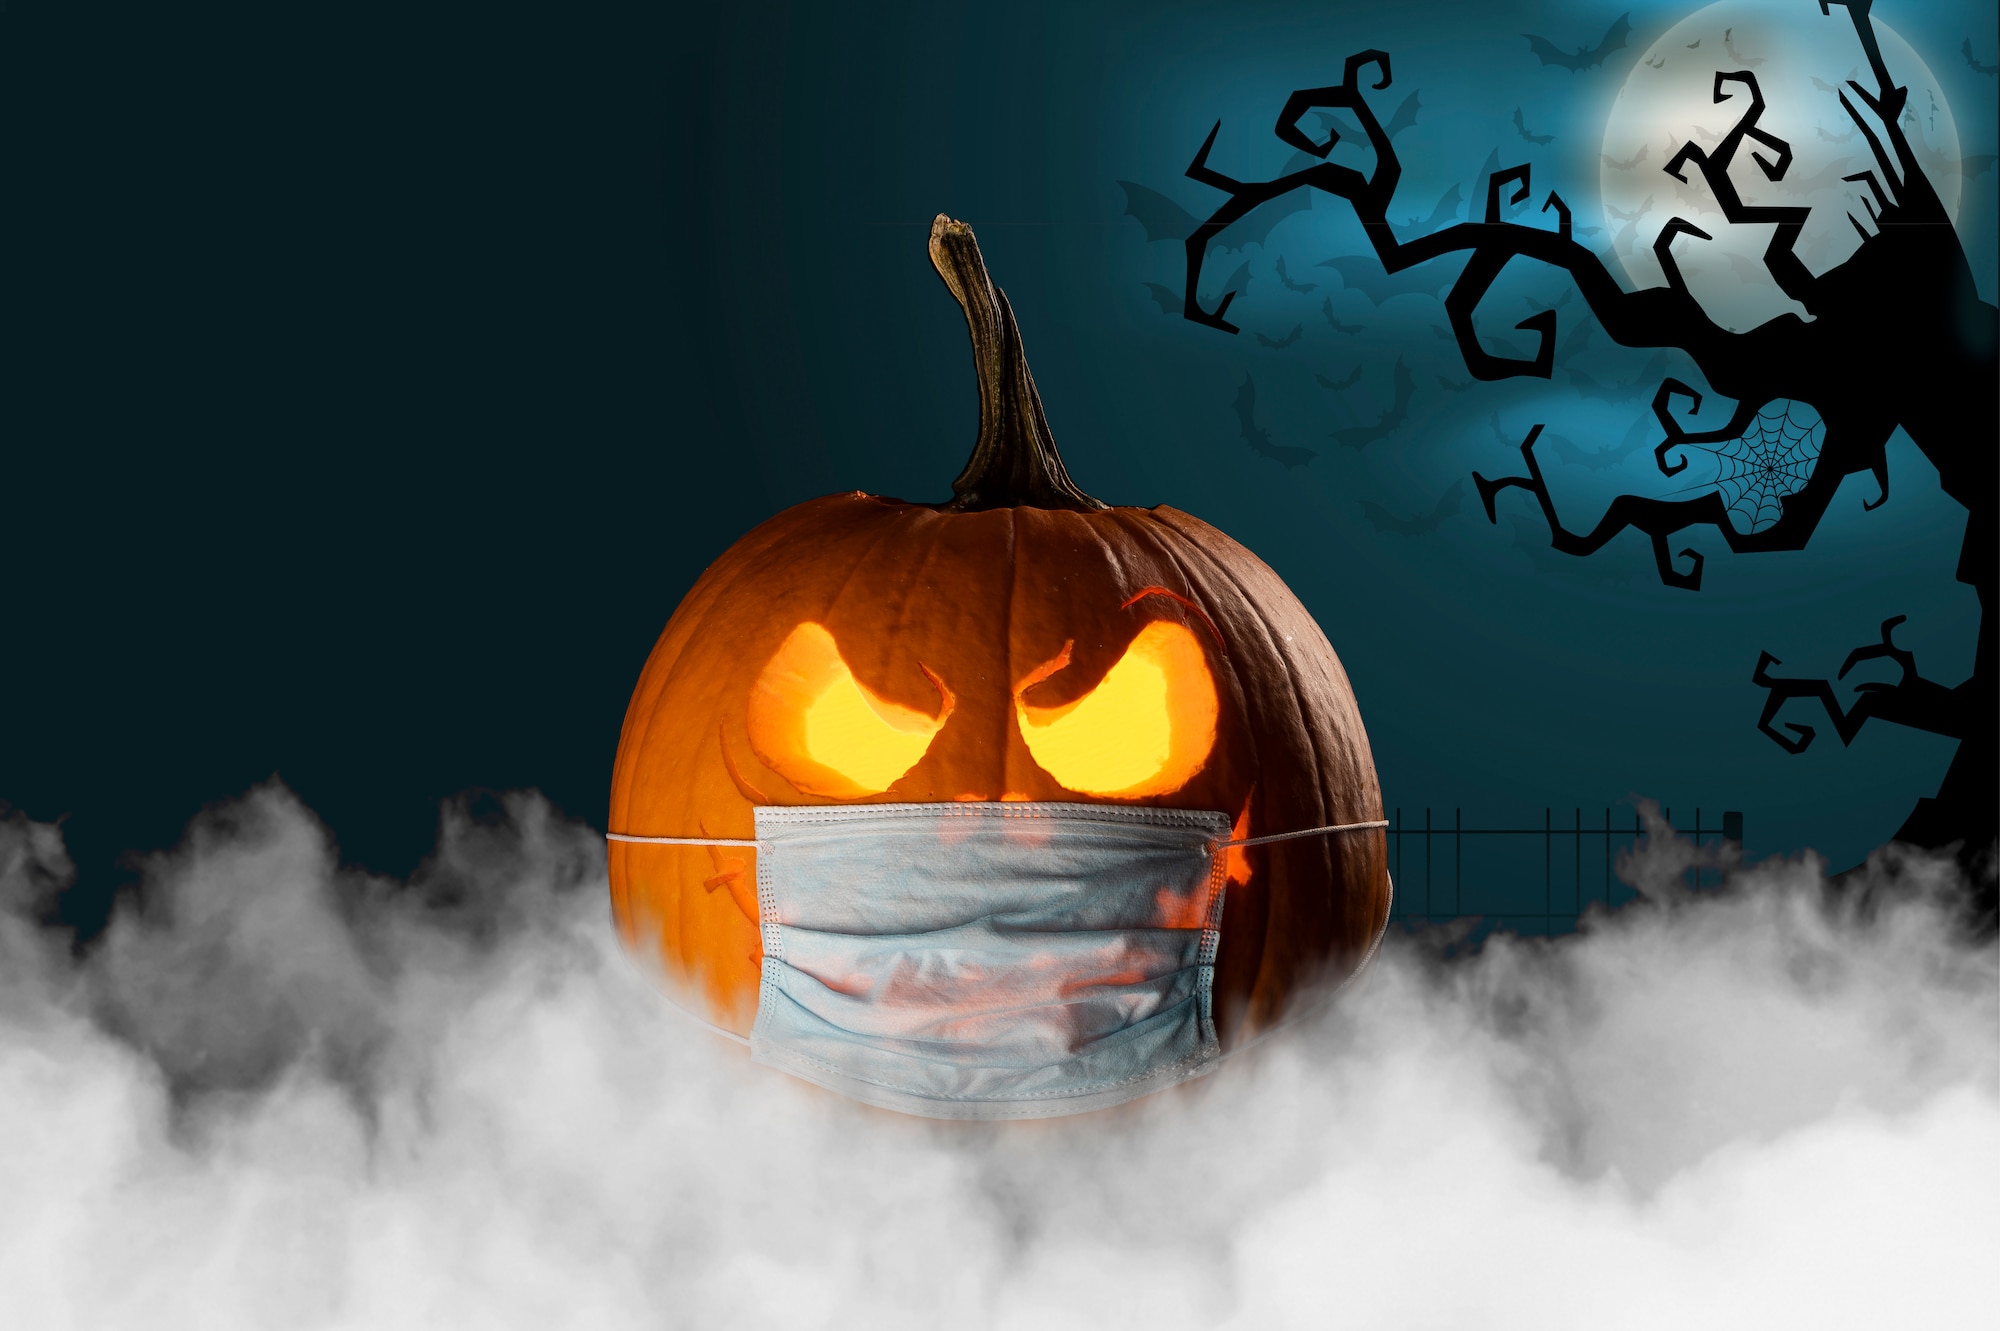 This Halloween photo illustration was created to wish everyone a safe and happy Halloween from the 436th Airlift Squadron at Dover Air Force Base, Delaware. (U.S. Air Force photo illustration by Senior Airman Christopher Quail) (This image was created by adding the official U.S. Air Force symbol to the bottom right, text was added to the top left, smoke was added to the bottom, background was added.)